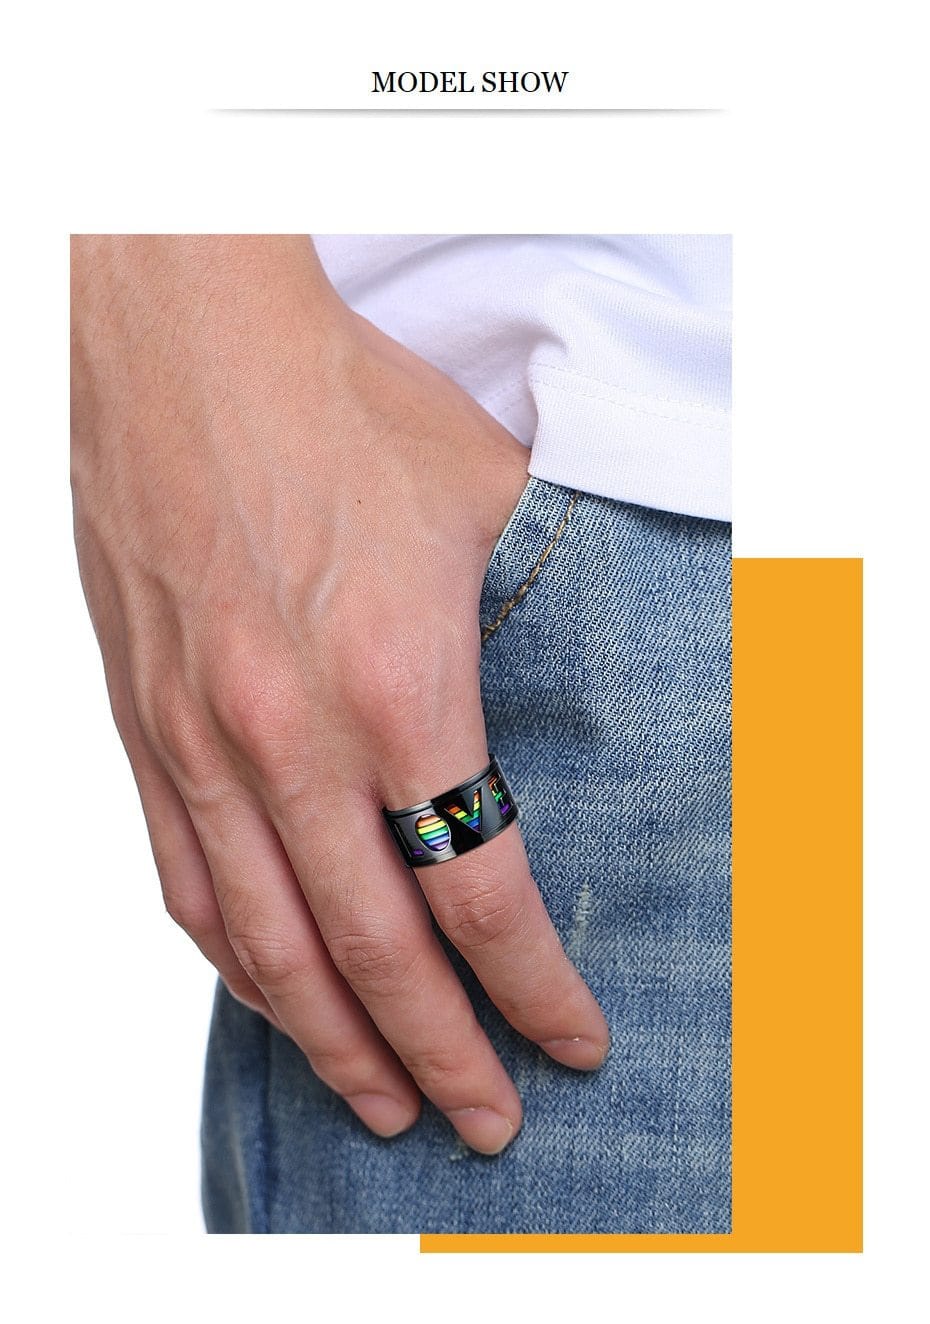 Rings Rainbow LOVE Black Spinner Ring GiveMe-Gifts